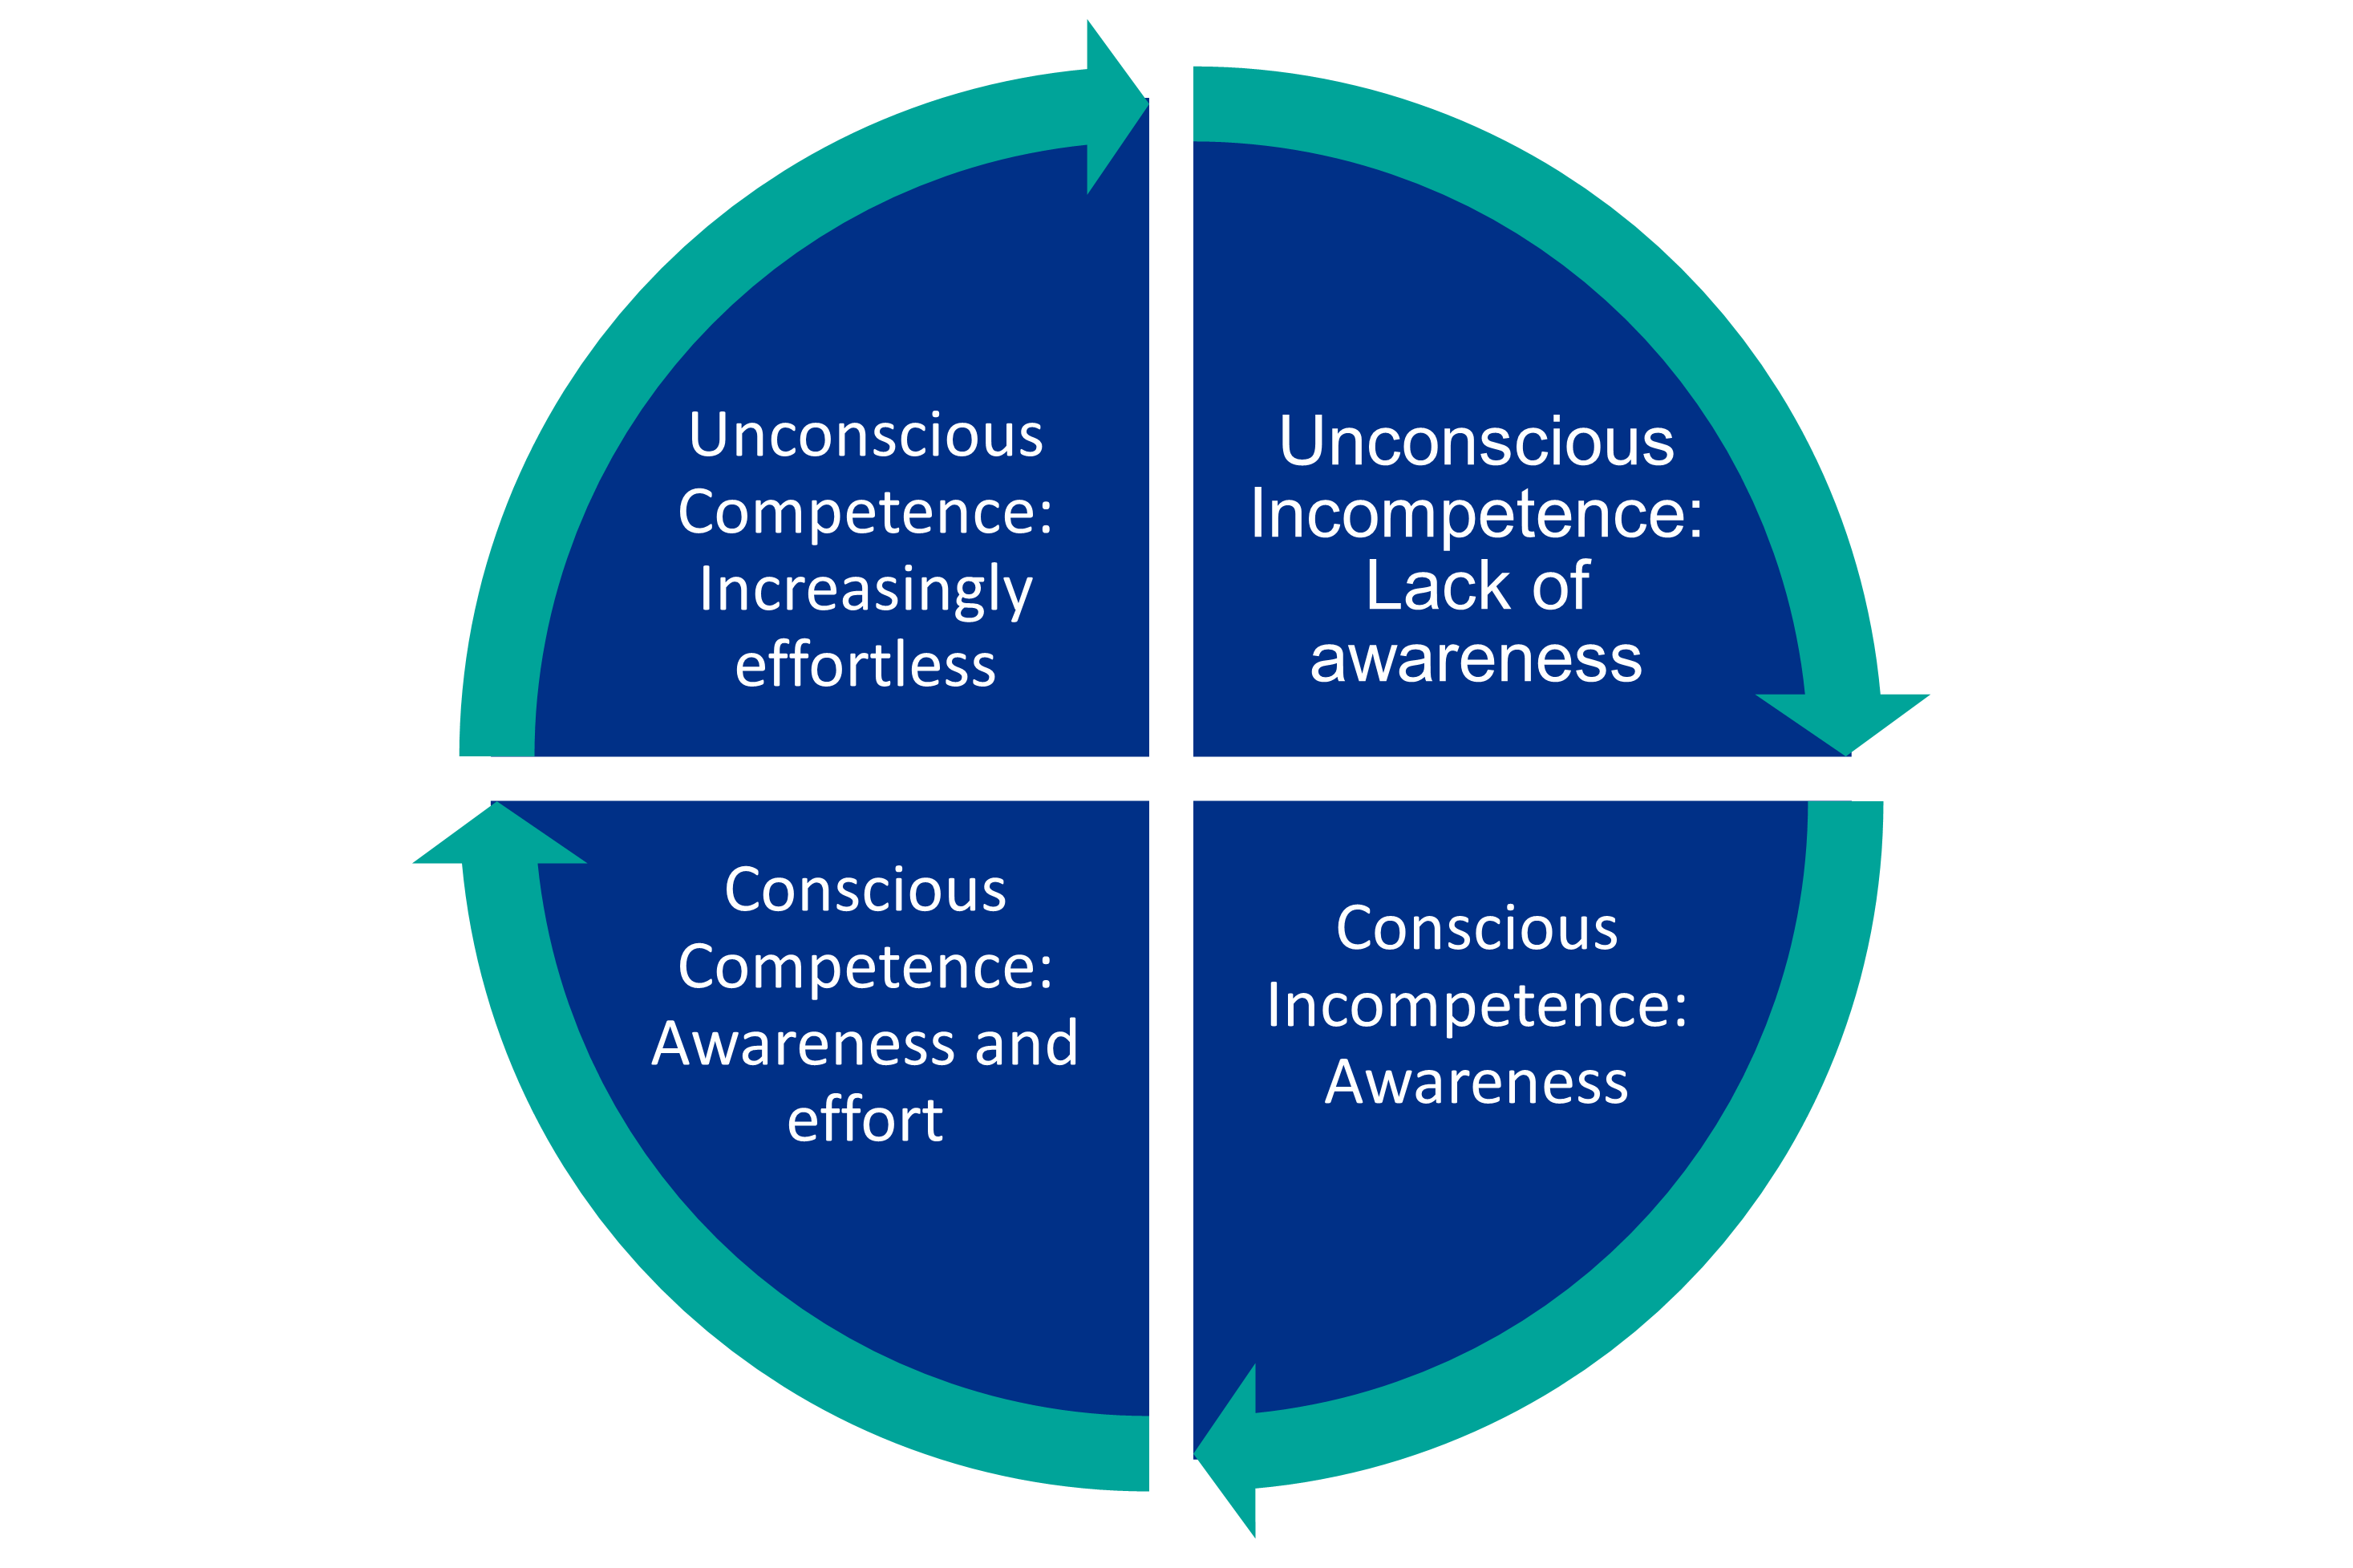 Peyton's (1998) model of skills' acquisition
Unconscious Incompetence: Lack of awareness
Conscious Incompetence: Awareness
Conscious Competence: Awareness and effort
Unconscious Competence: Increasingly effortless 

